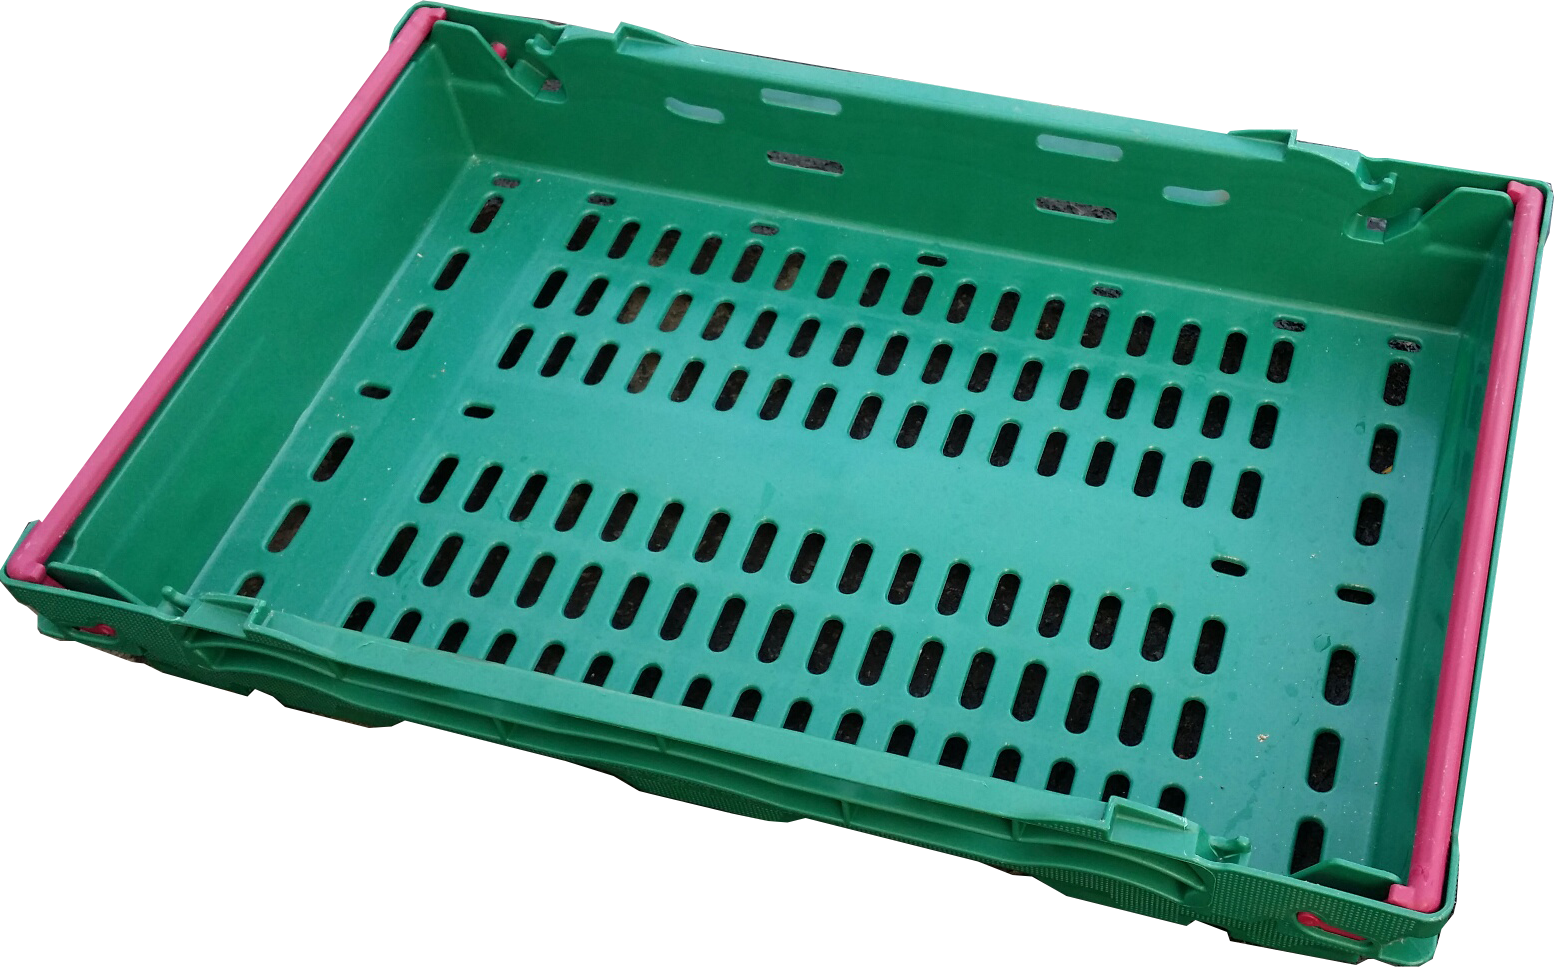 UK Suppliers Of Saeplast 660 Container (628 Ltrs) For The Retail Sector